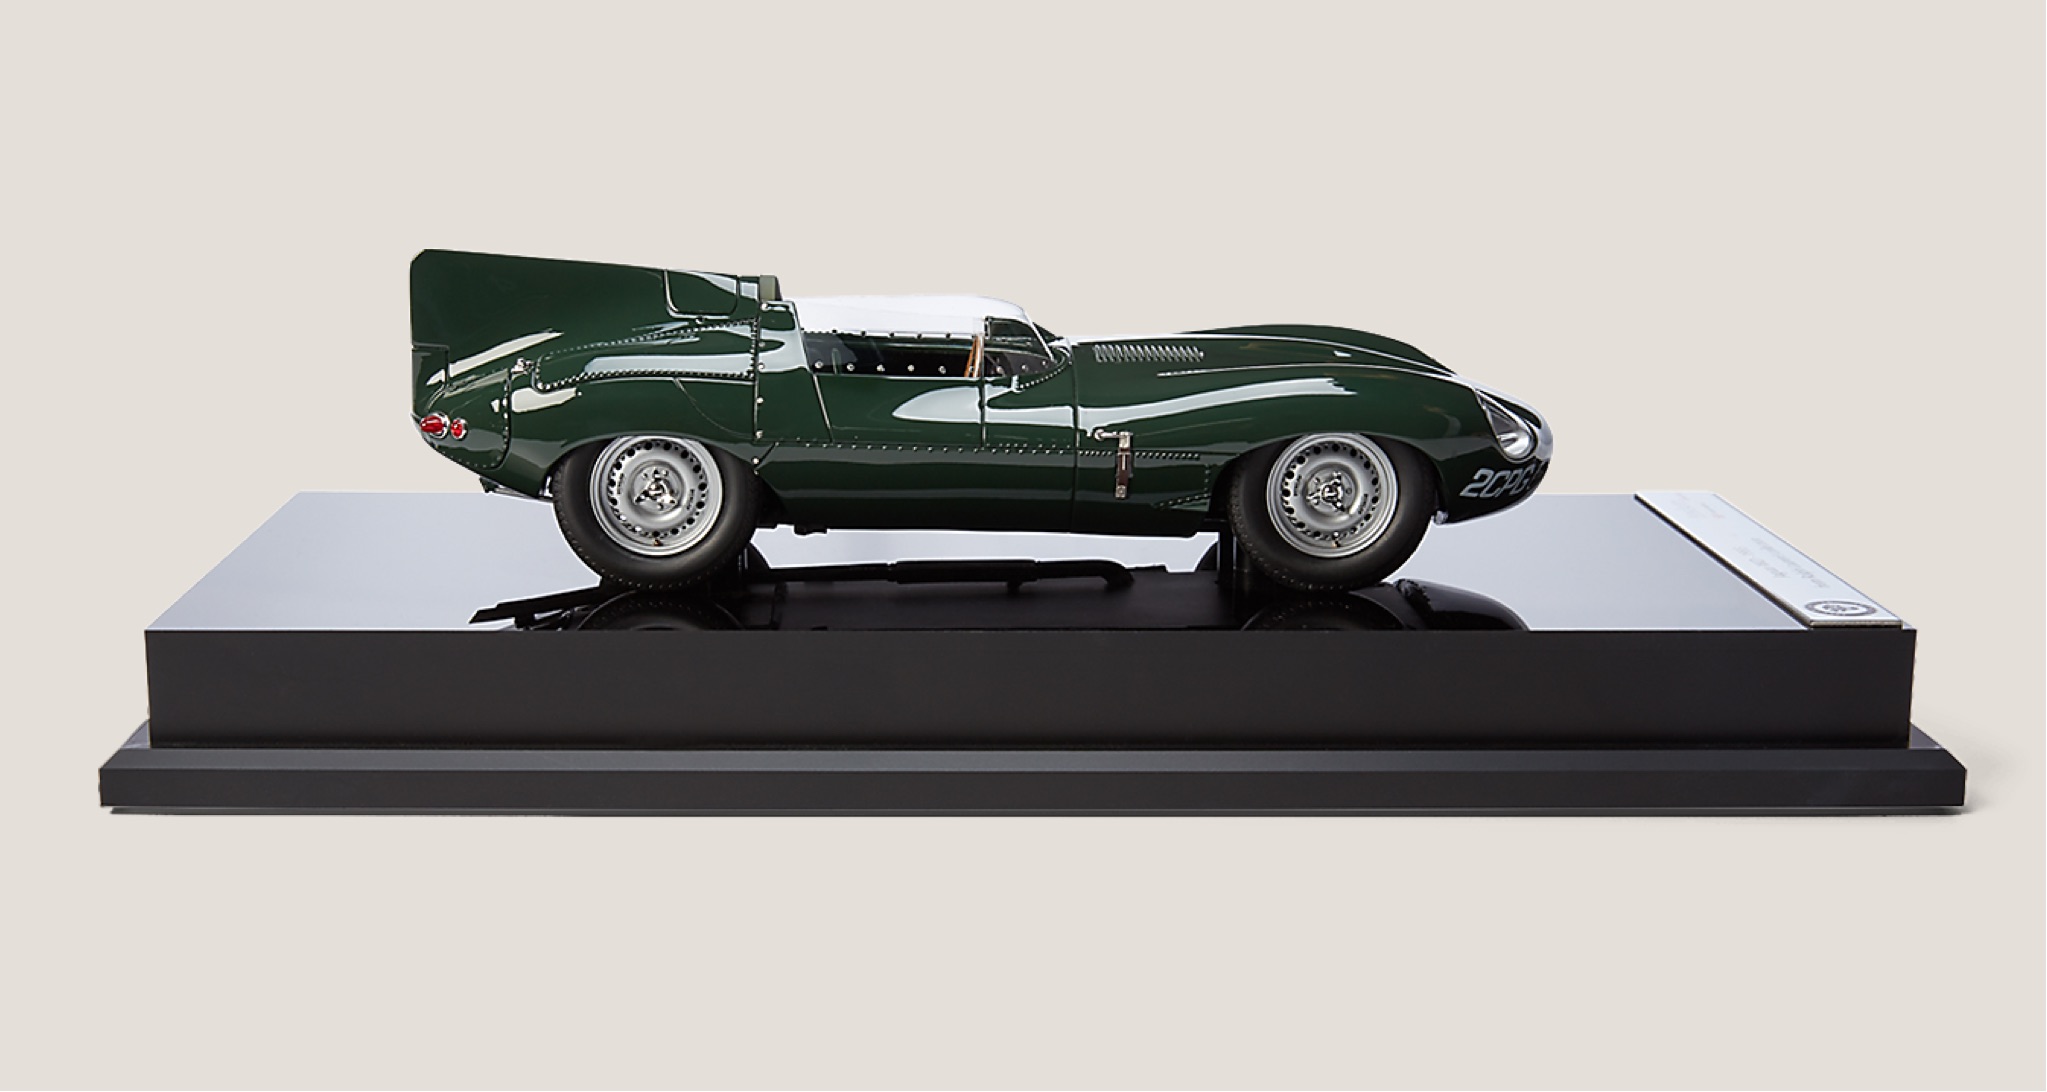 <span>The long-nose Jagaur XKD from 1955 won Le Mans that year, the first of three successive D-type victories at the world’s most famous and important race</span><br/><a href="https://www.ralphlauren.com/home-decor-decorative-accessories/1955-jaguar-xkd/453615.html?dwvar453615_colorname=Green" target="_blank" class="rlc-linecta rlc-lineplay"><span>SHOP NOW</span></a>